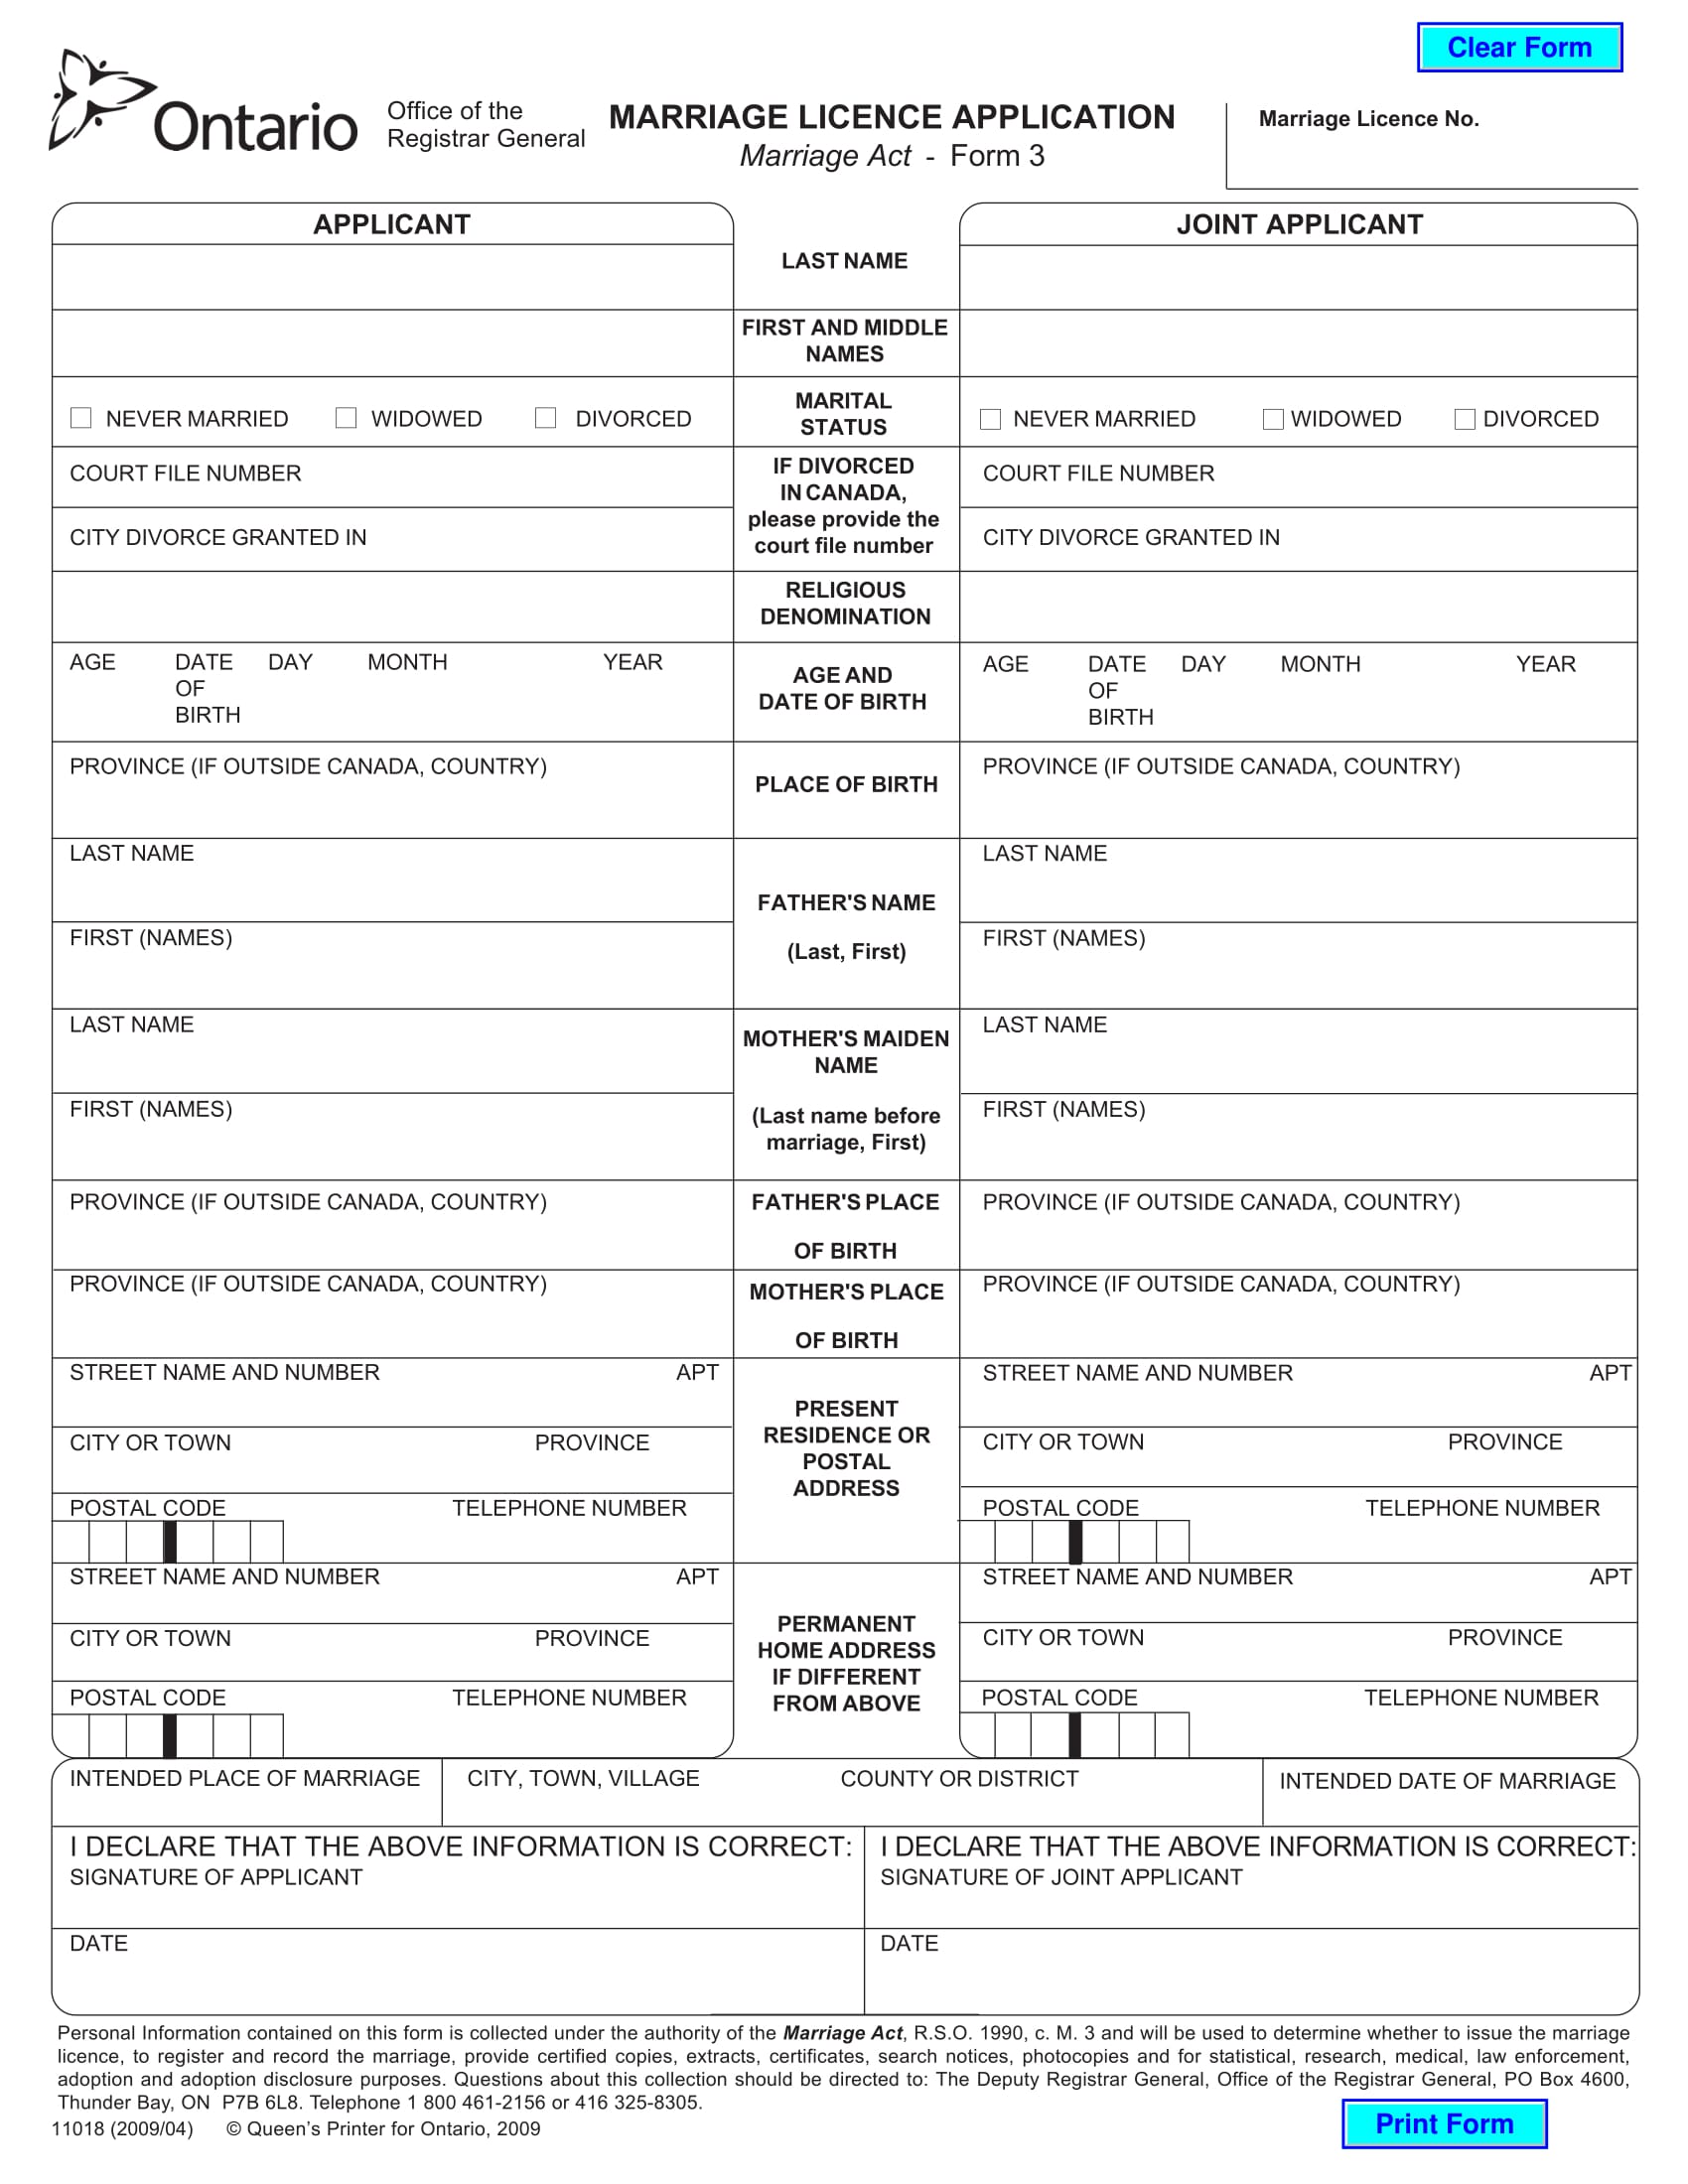 marriage licence application